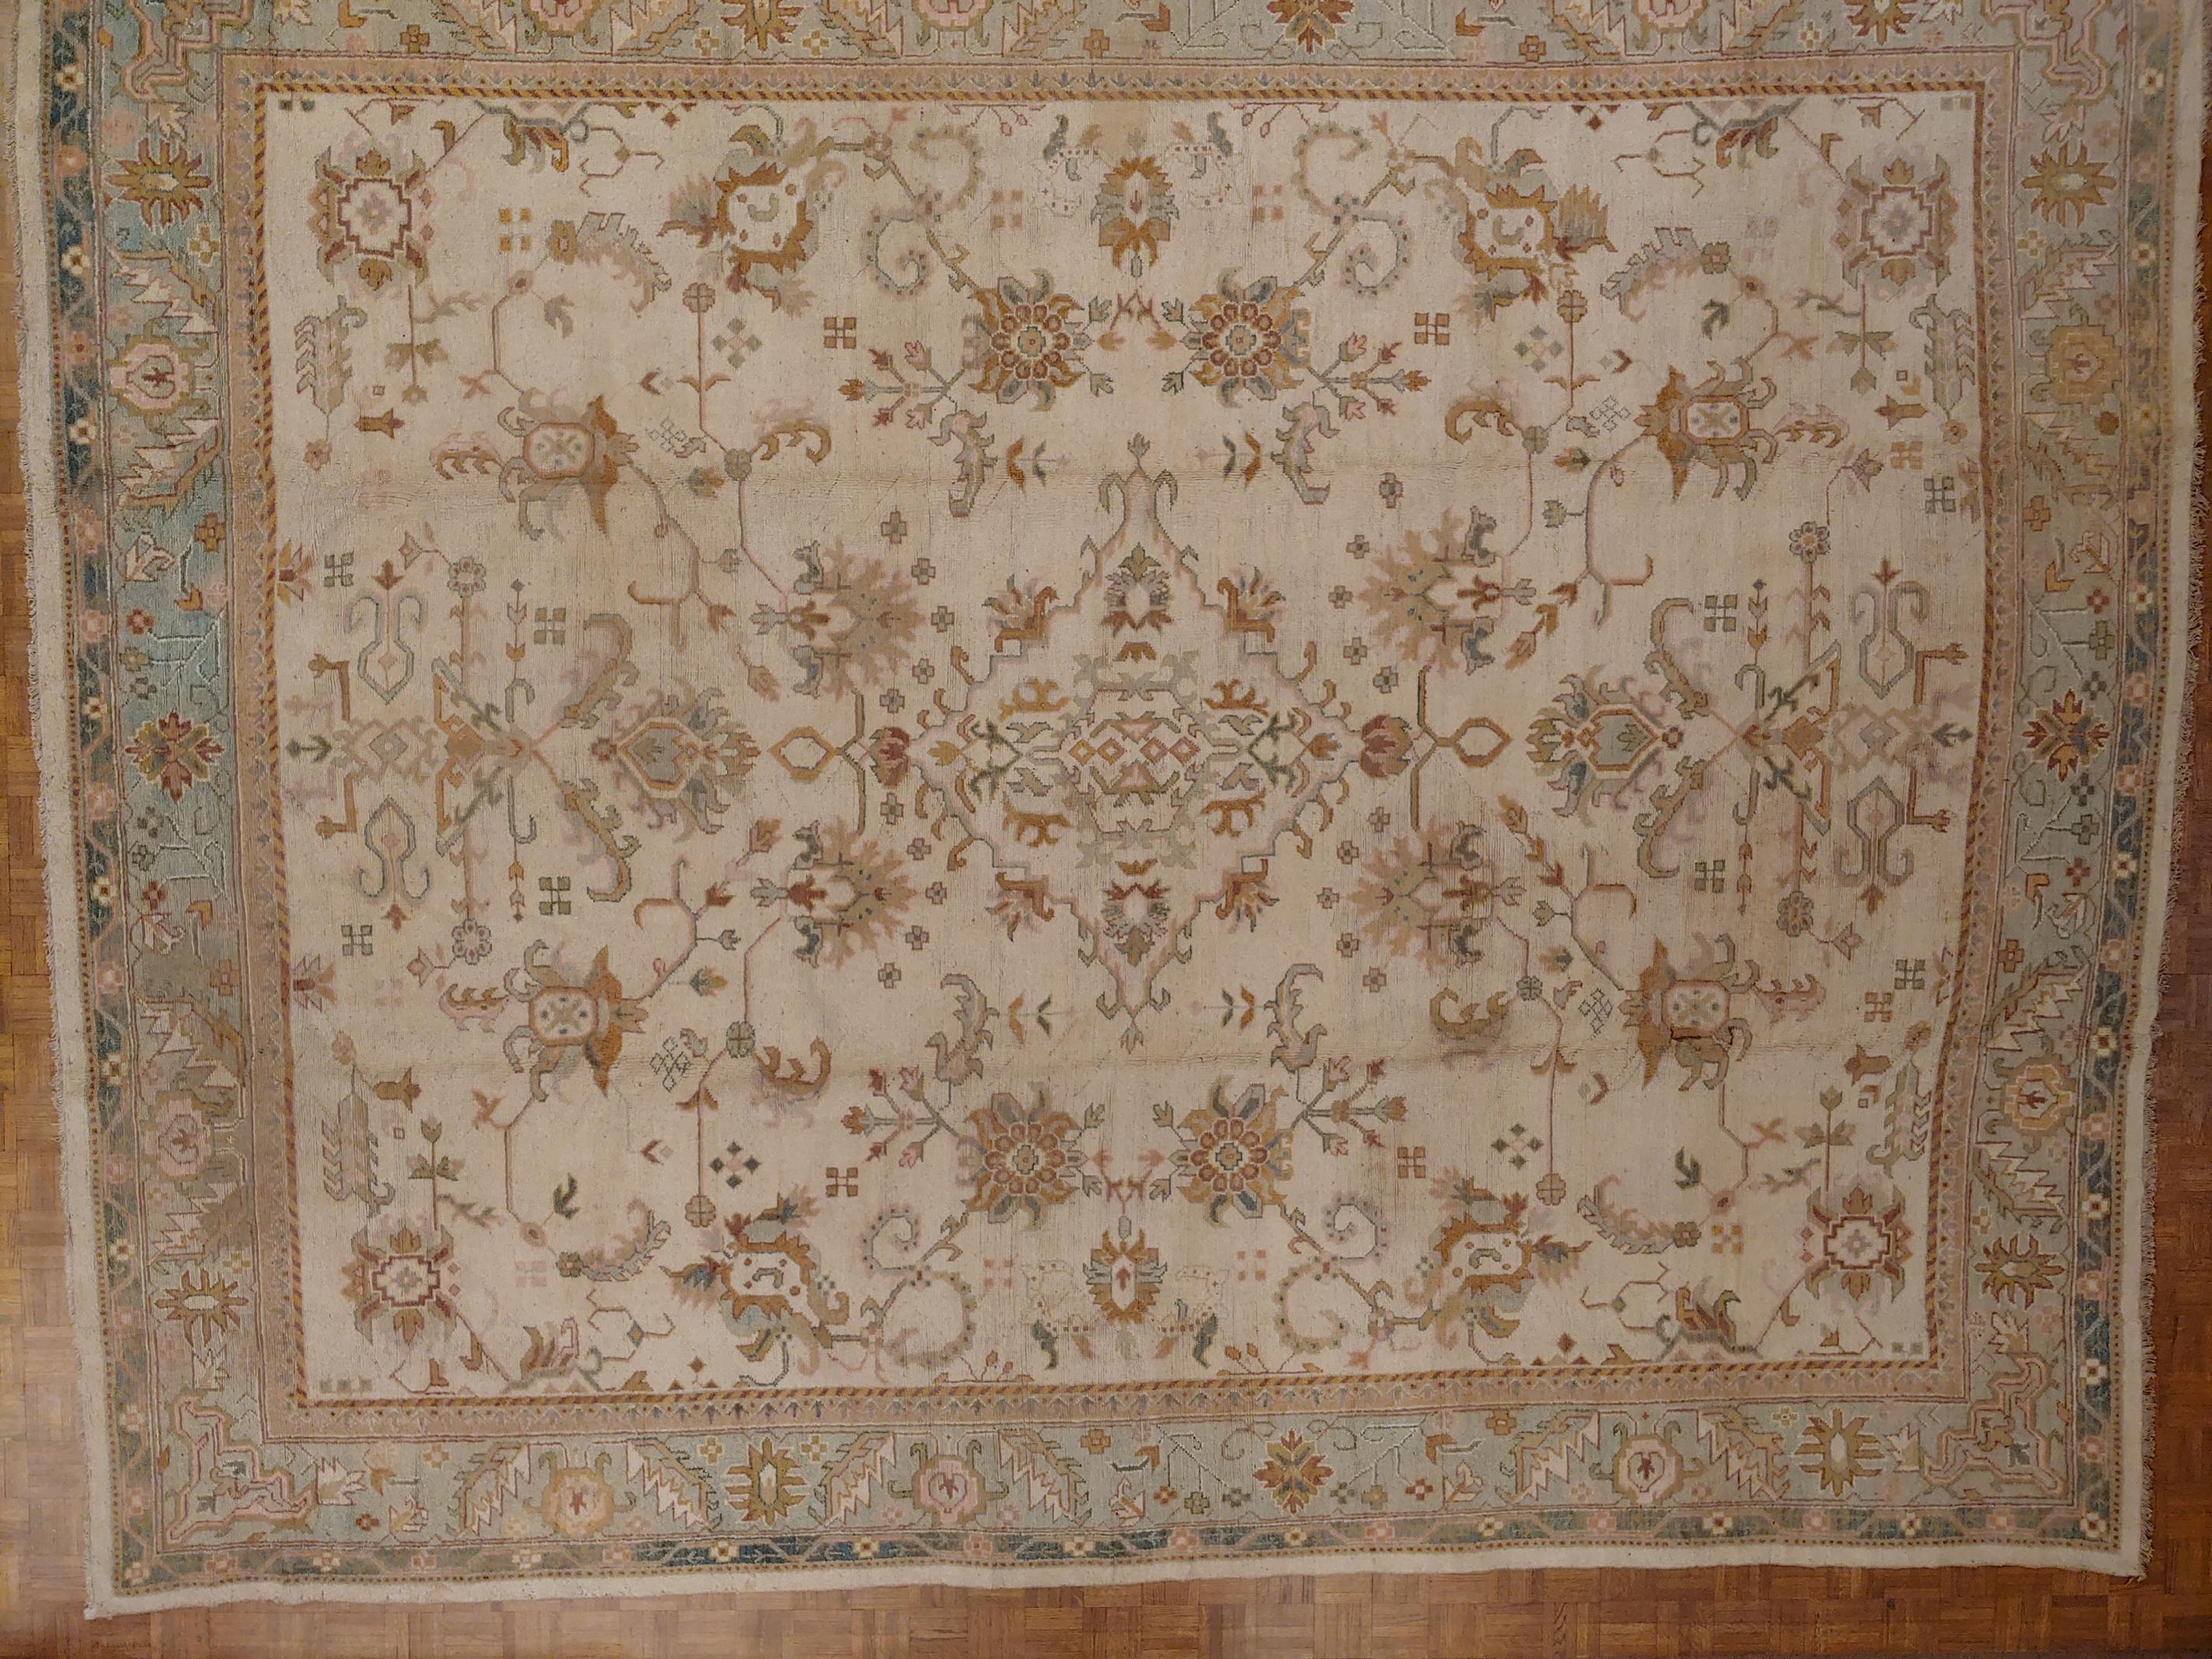 This is an early rug that is a copy of an Oushak design woven in India. With an all-over design and no center medallion, it is very decorative and desirable. Also the soft green border is unusual and splendid. There are several variations of green,